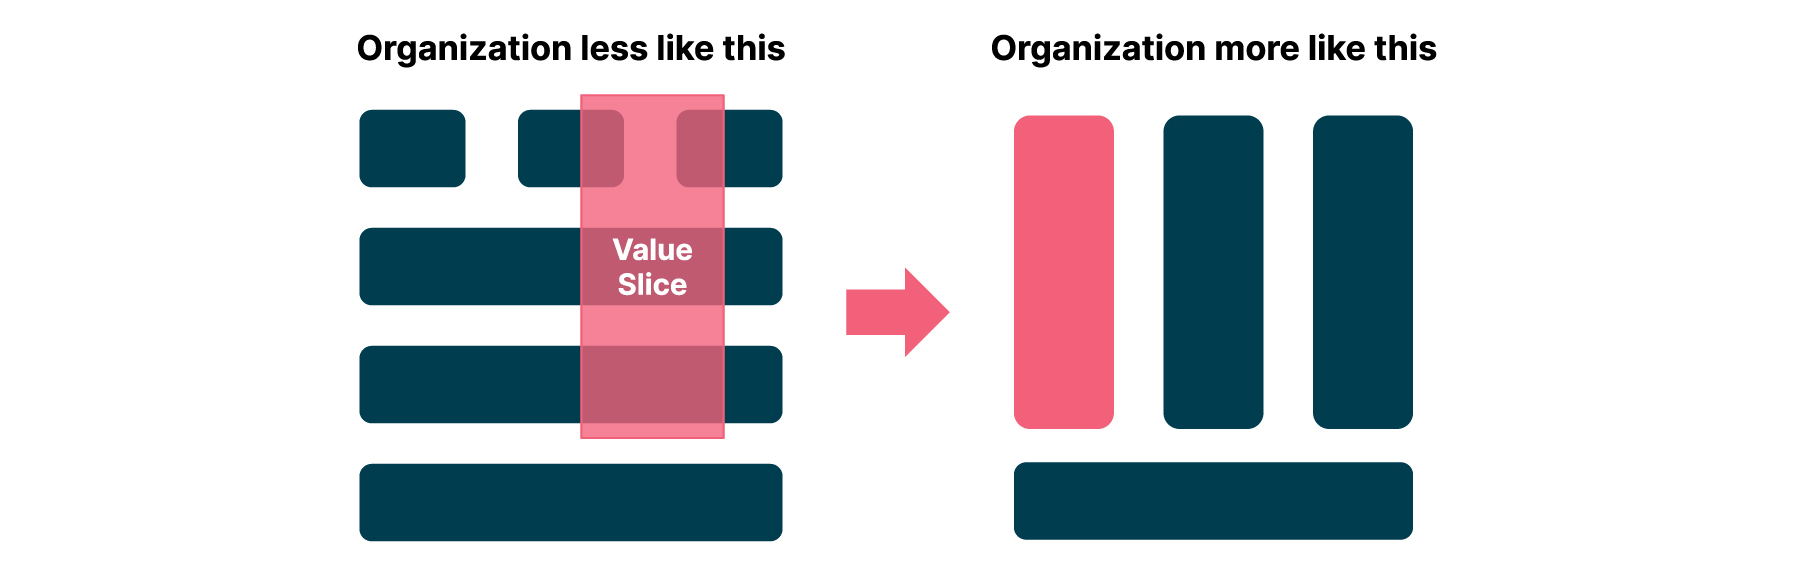 Benefits for organization using Value Slice approach